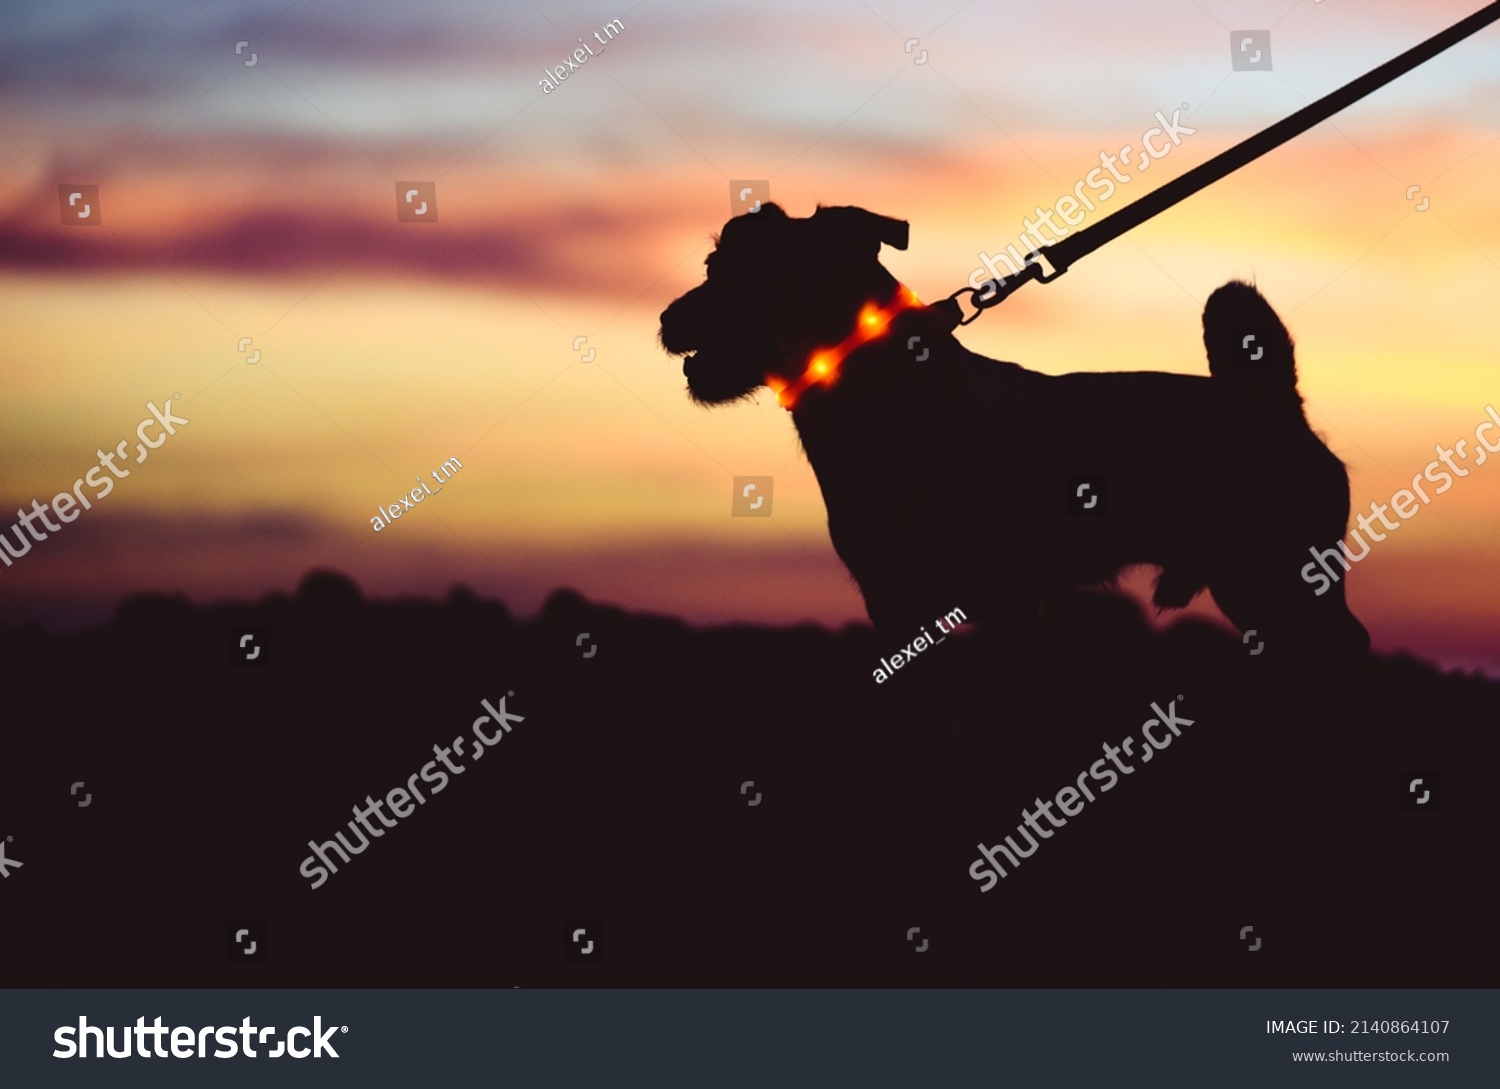 Safe evening or night walk with pet concept. Silhouette of dog on leash wearing LED-light collar against beautiful sunset sky #2140864107